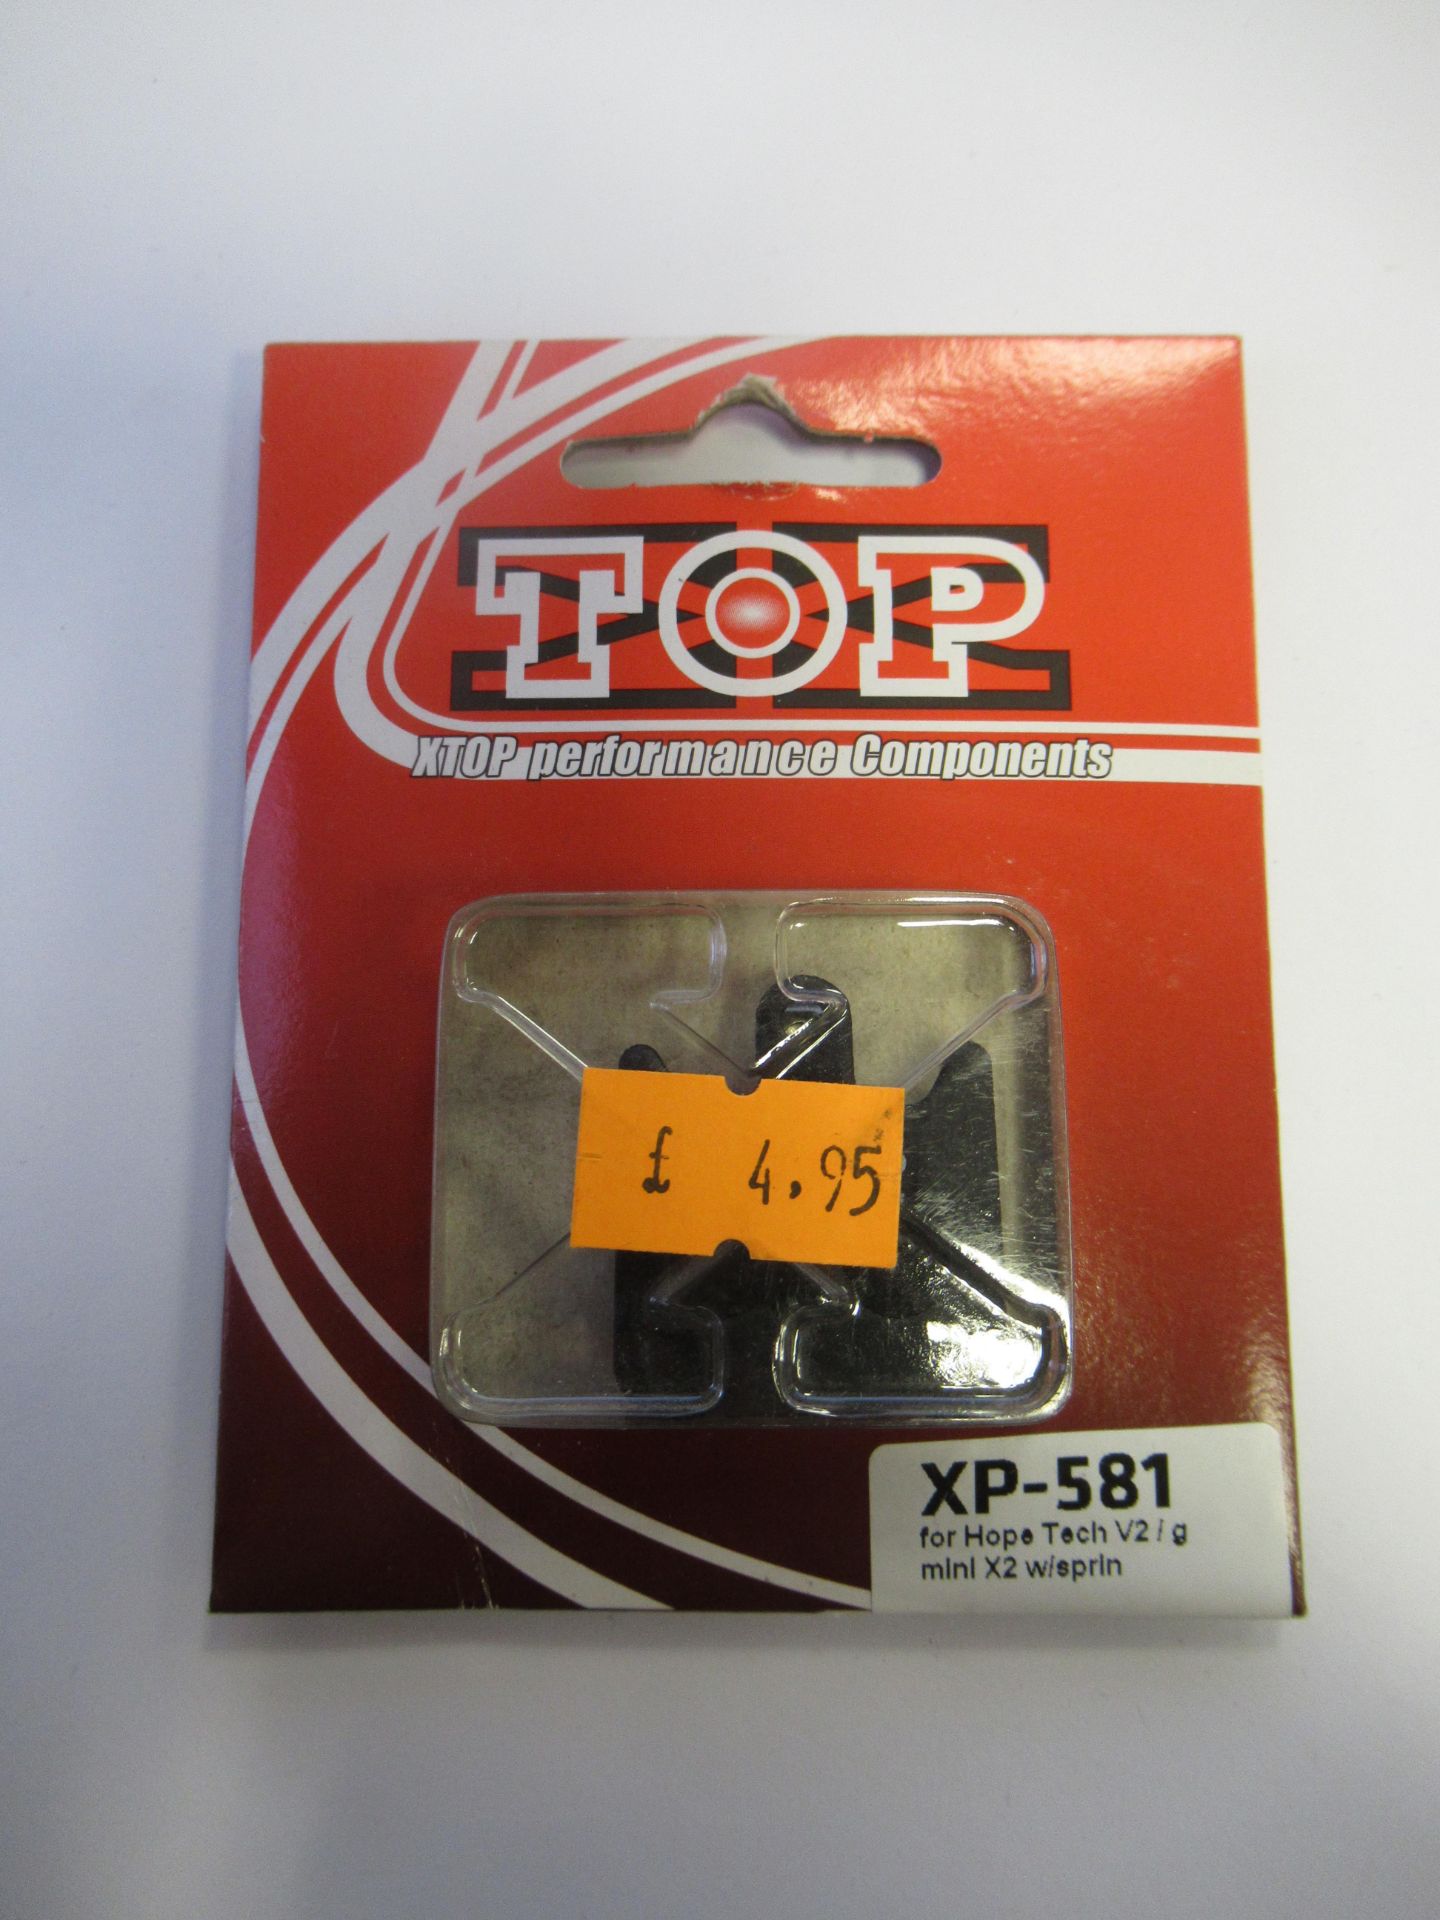 Bicycle parts to include XTOP performance Components, 2x XP-160, RRP £7.95 each and 3x XP-581, RRP £ - Image 12 of 35